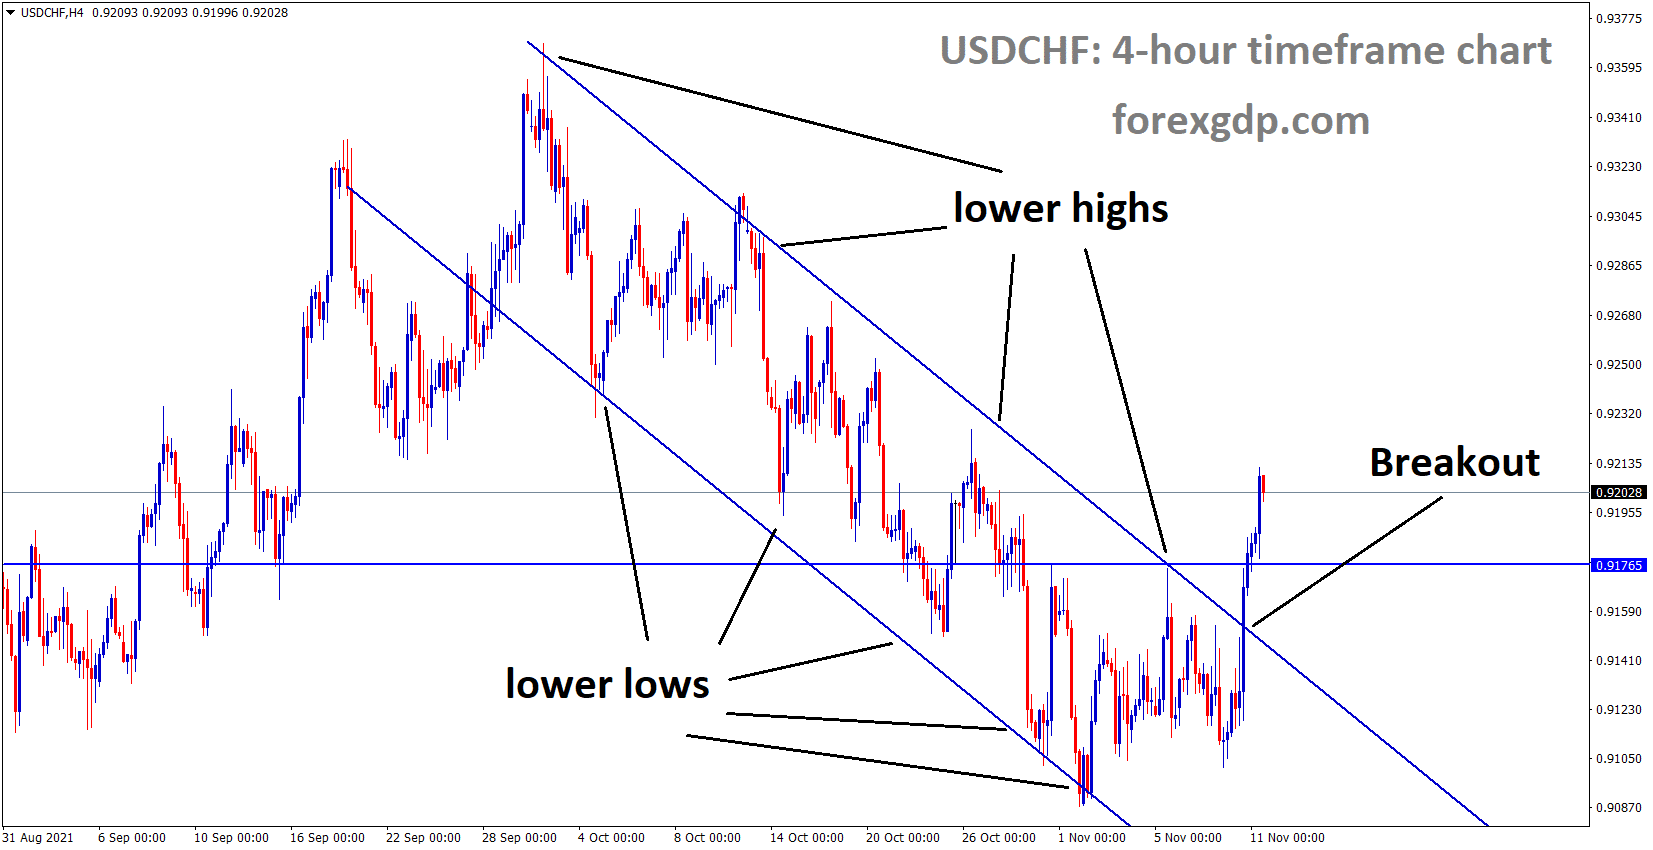 USDCHF has broken the Descending channel and recent consolidation resistance area.